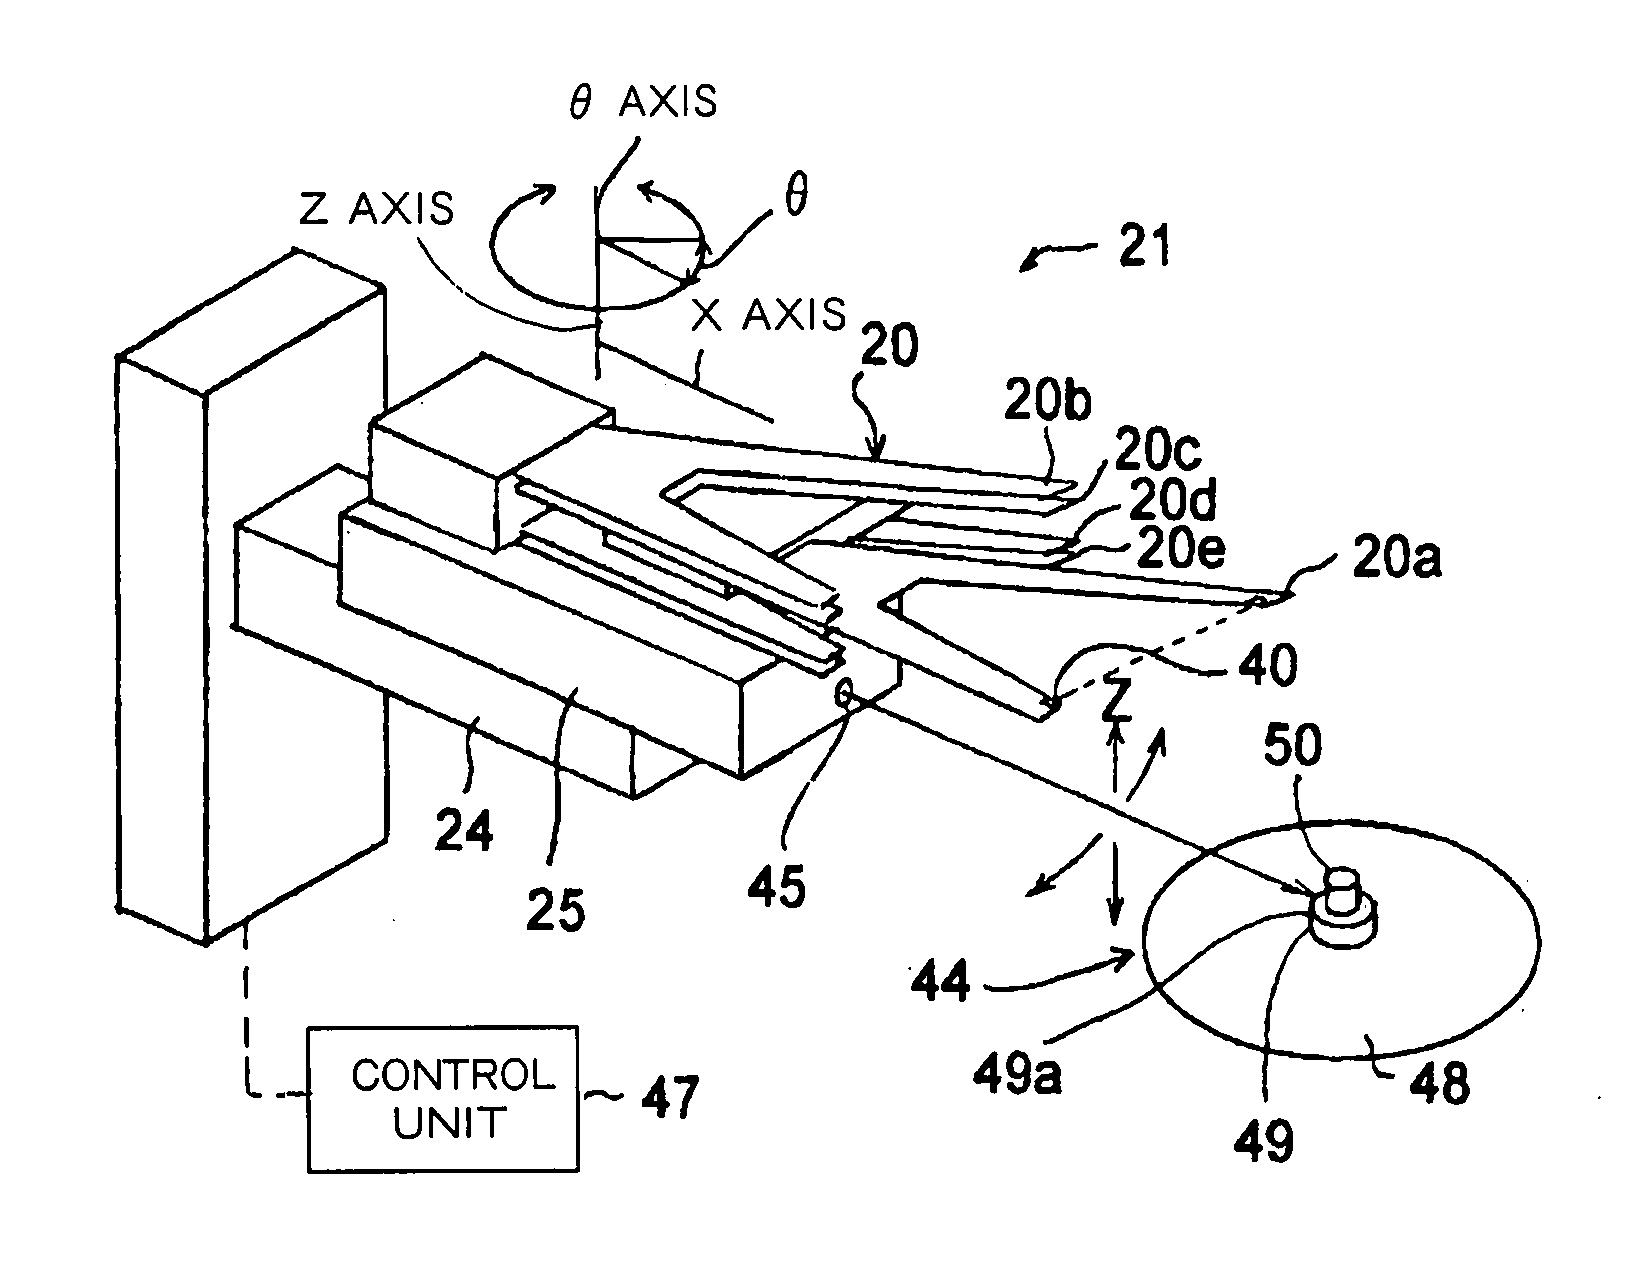 Vertical Heat Treatment System and Automatic Teaching Method for Transfer Mechanism